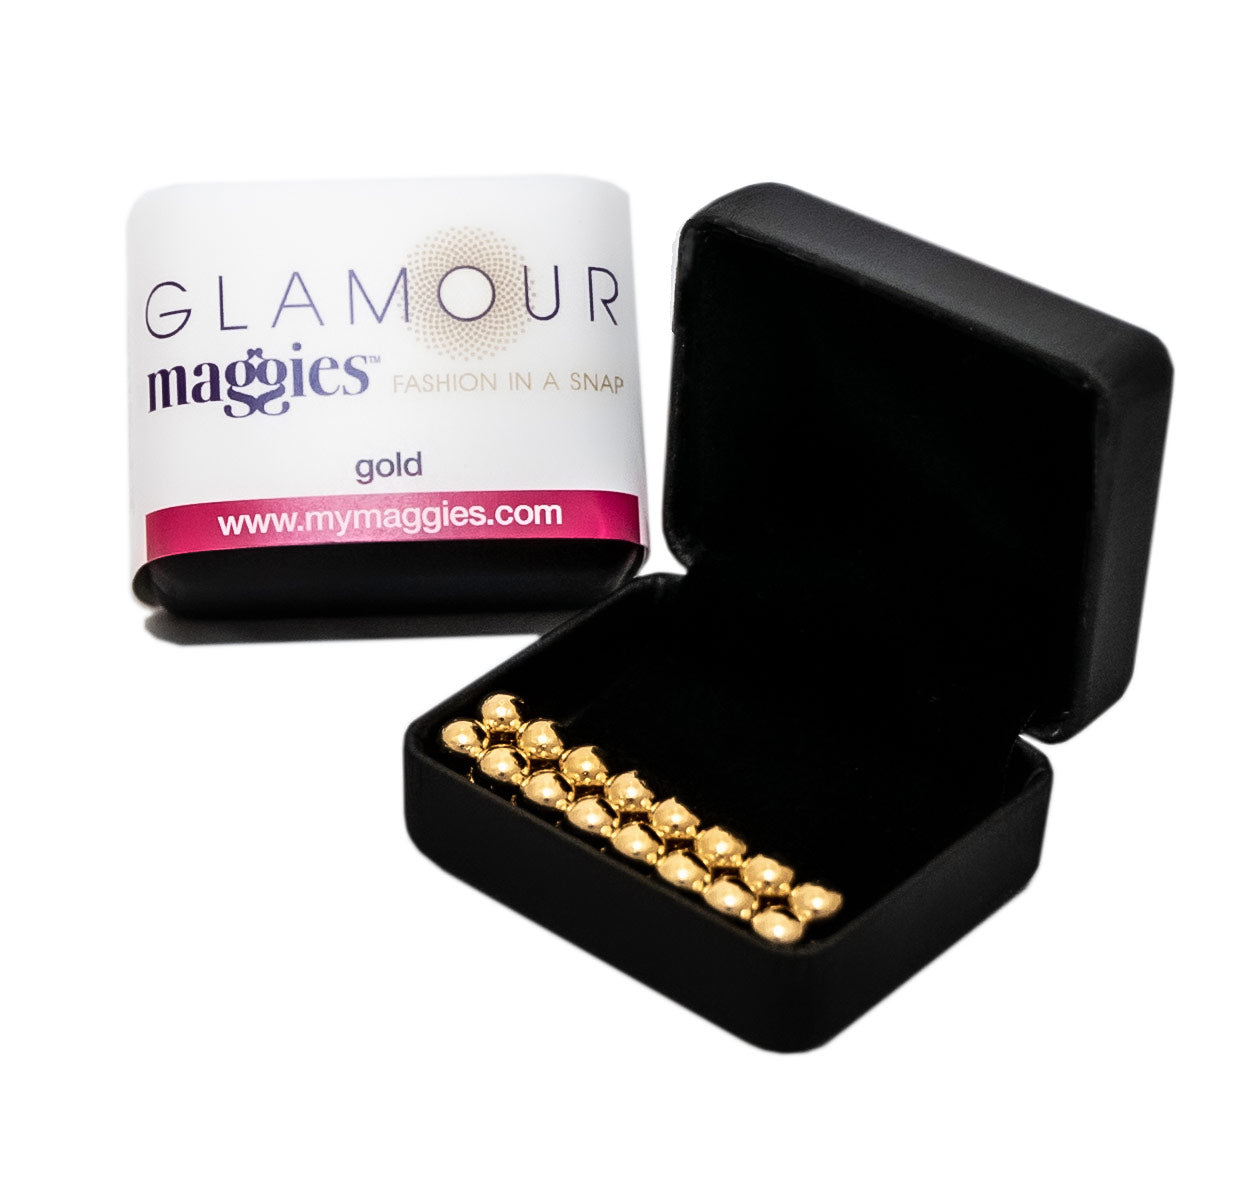 Glamour Maggies Packaging